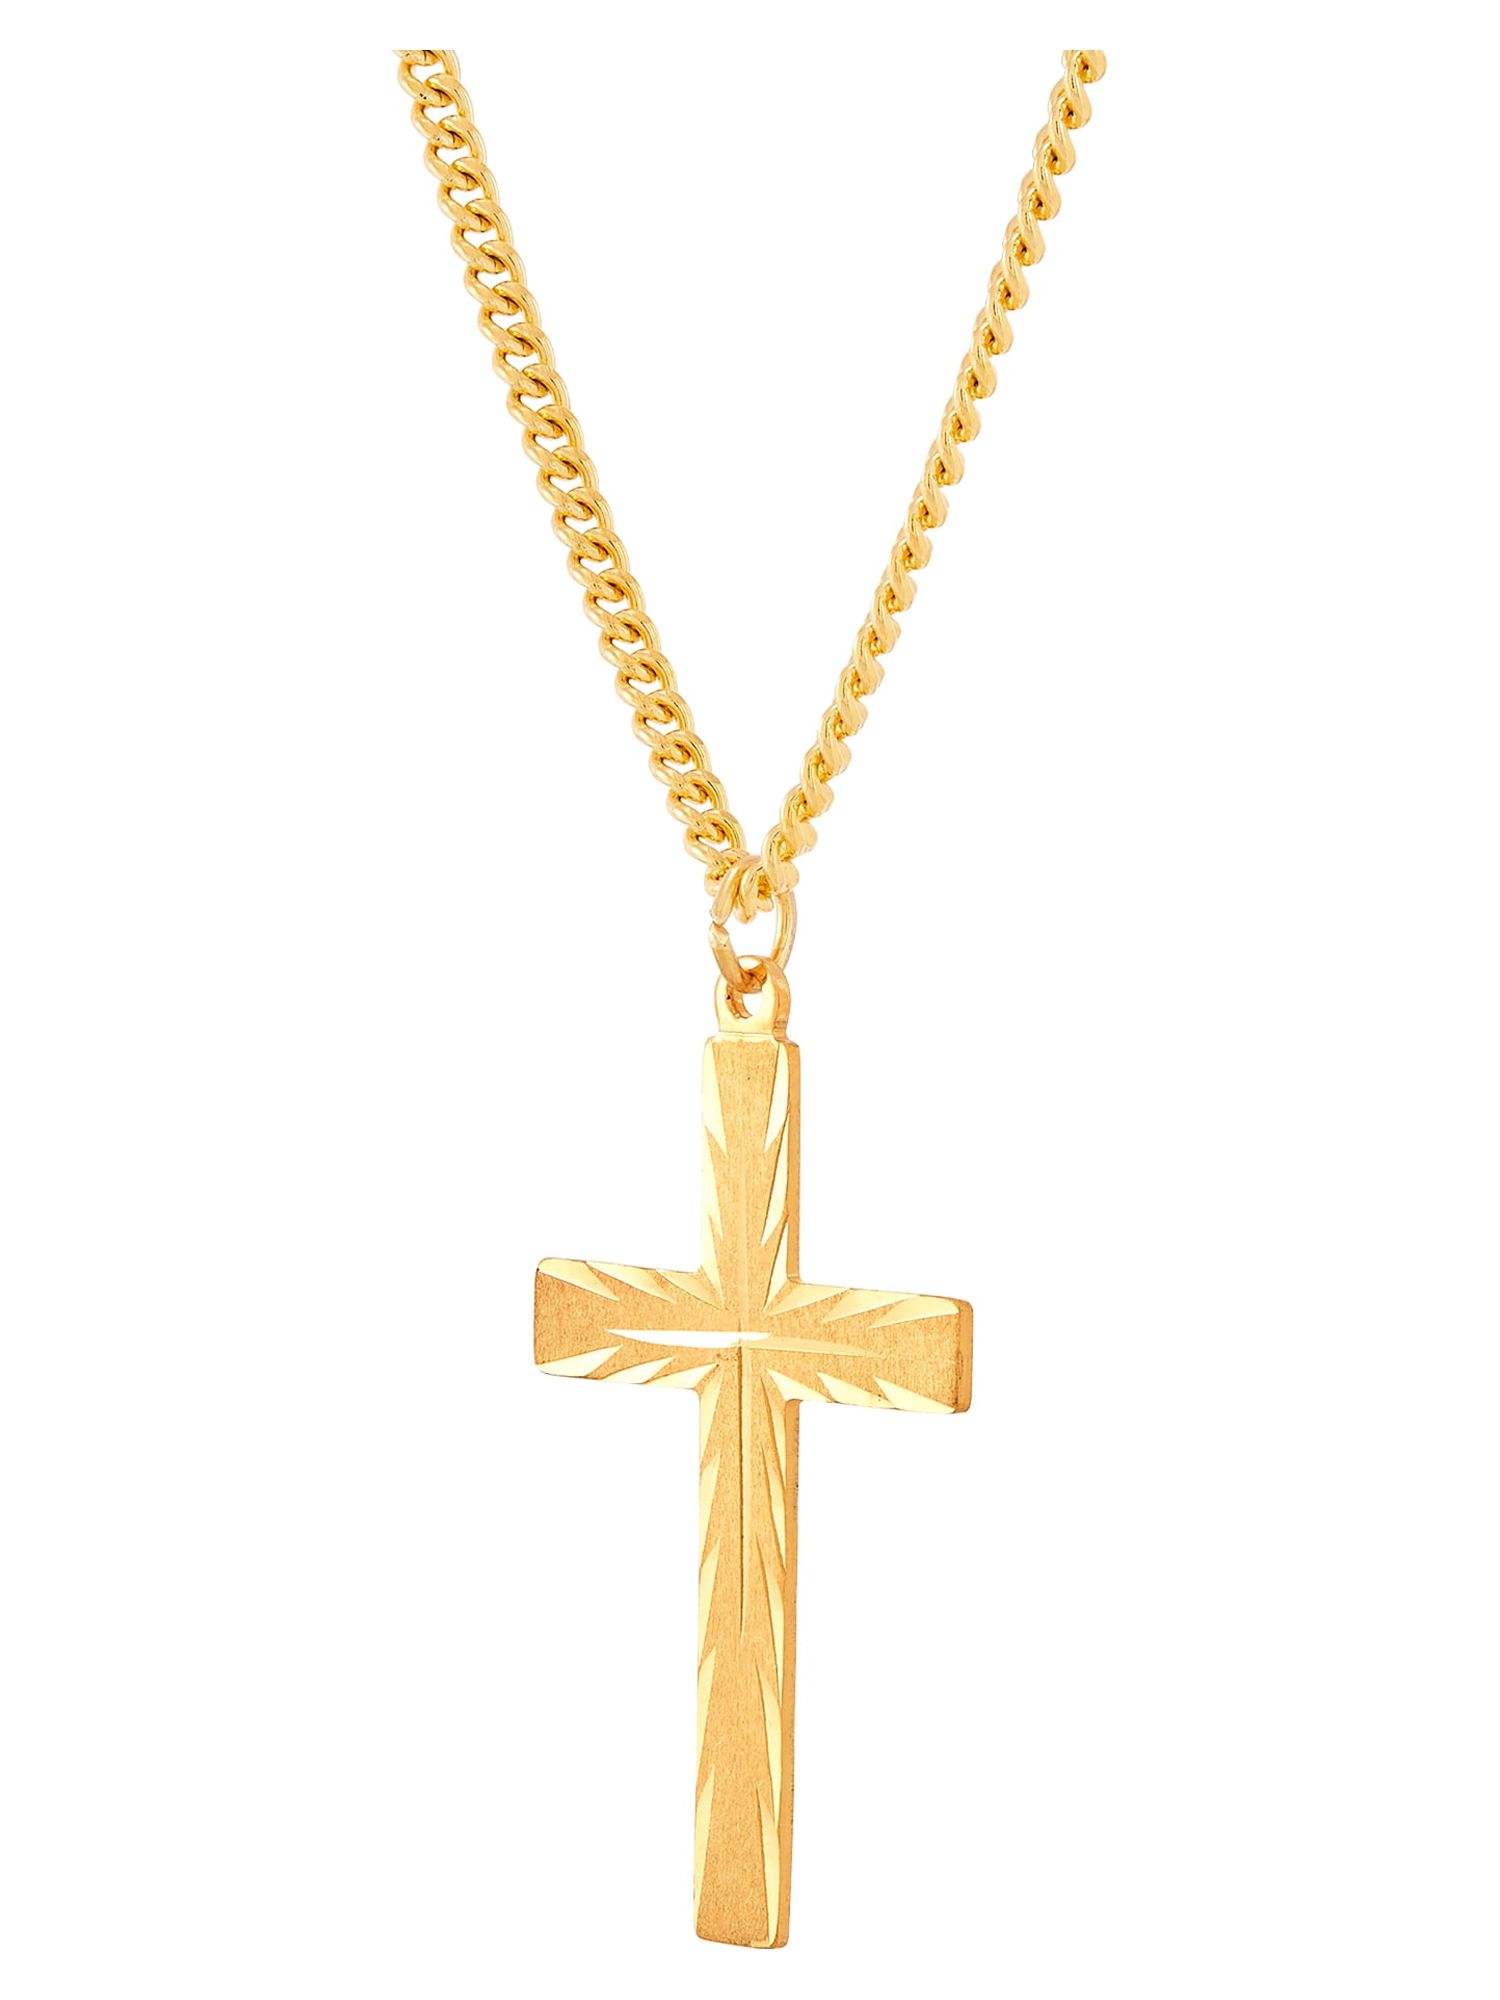 Brilliance Fine Jewelry Gold-Filled Cross Pendant, 24" Stainless Steel Chain - image 3 of 4